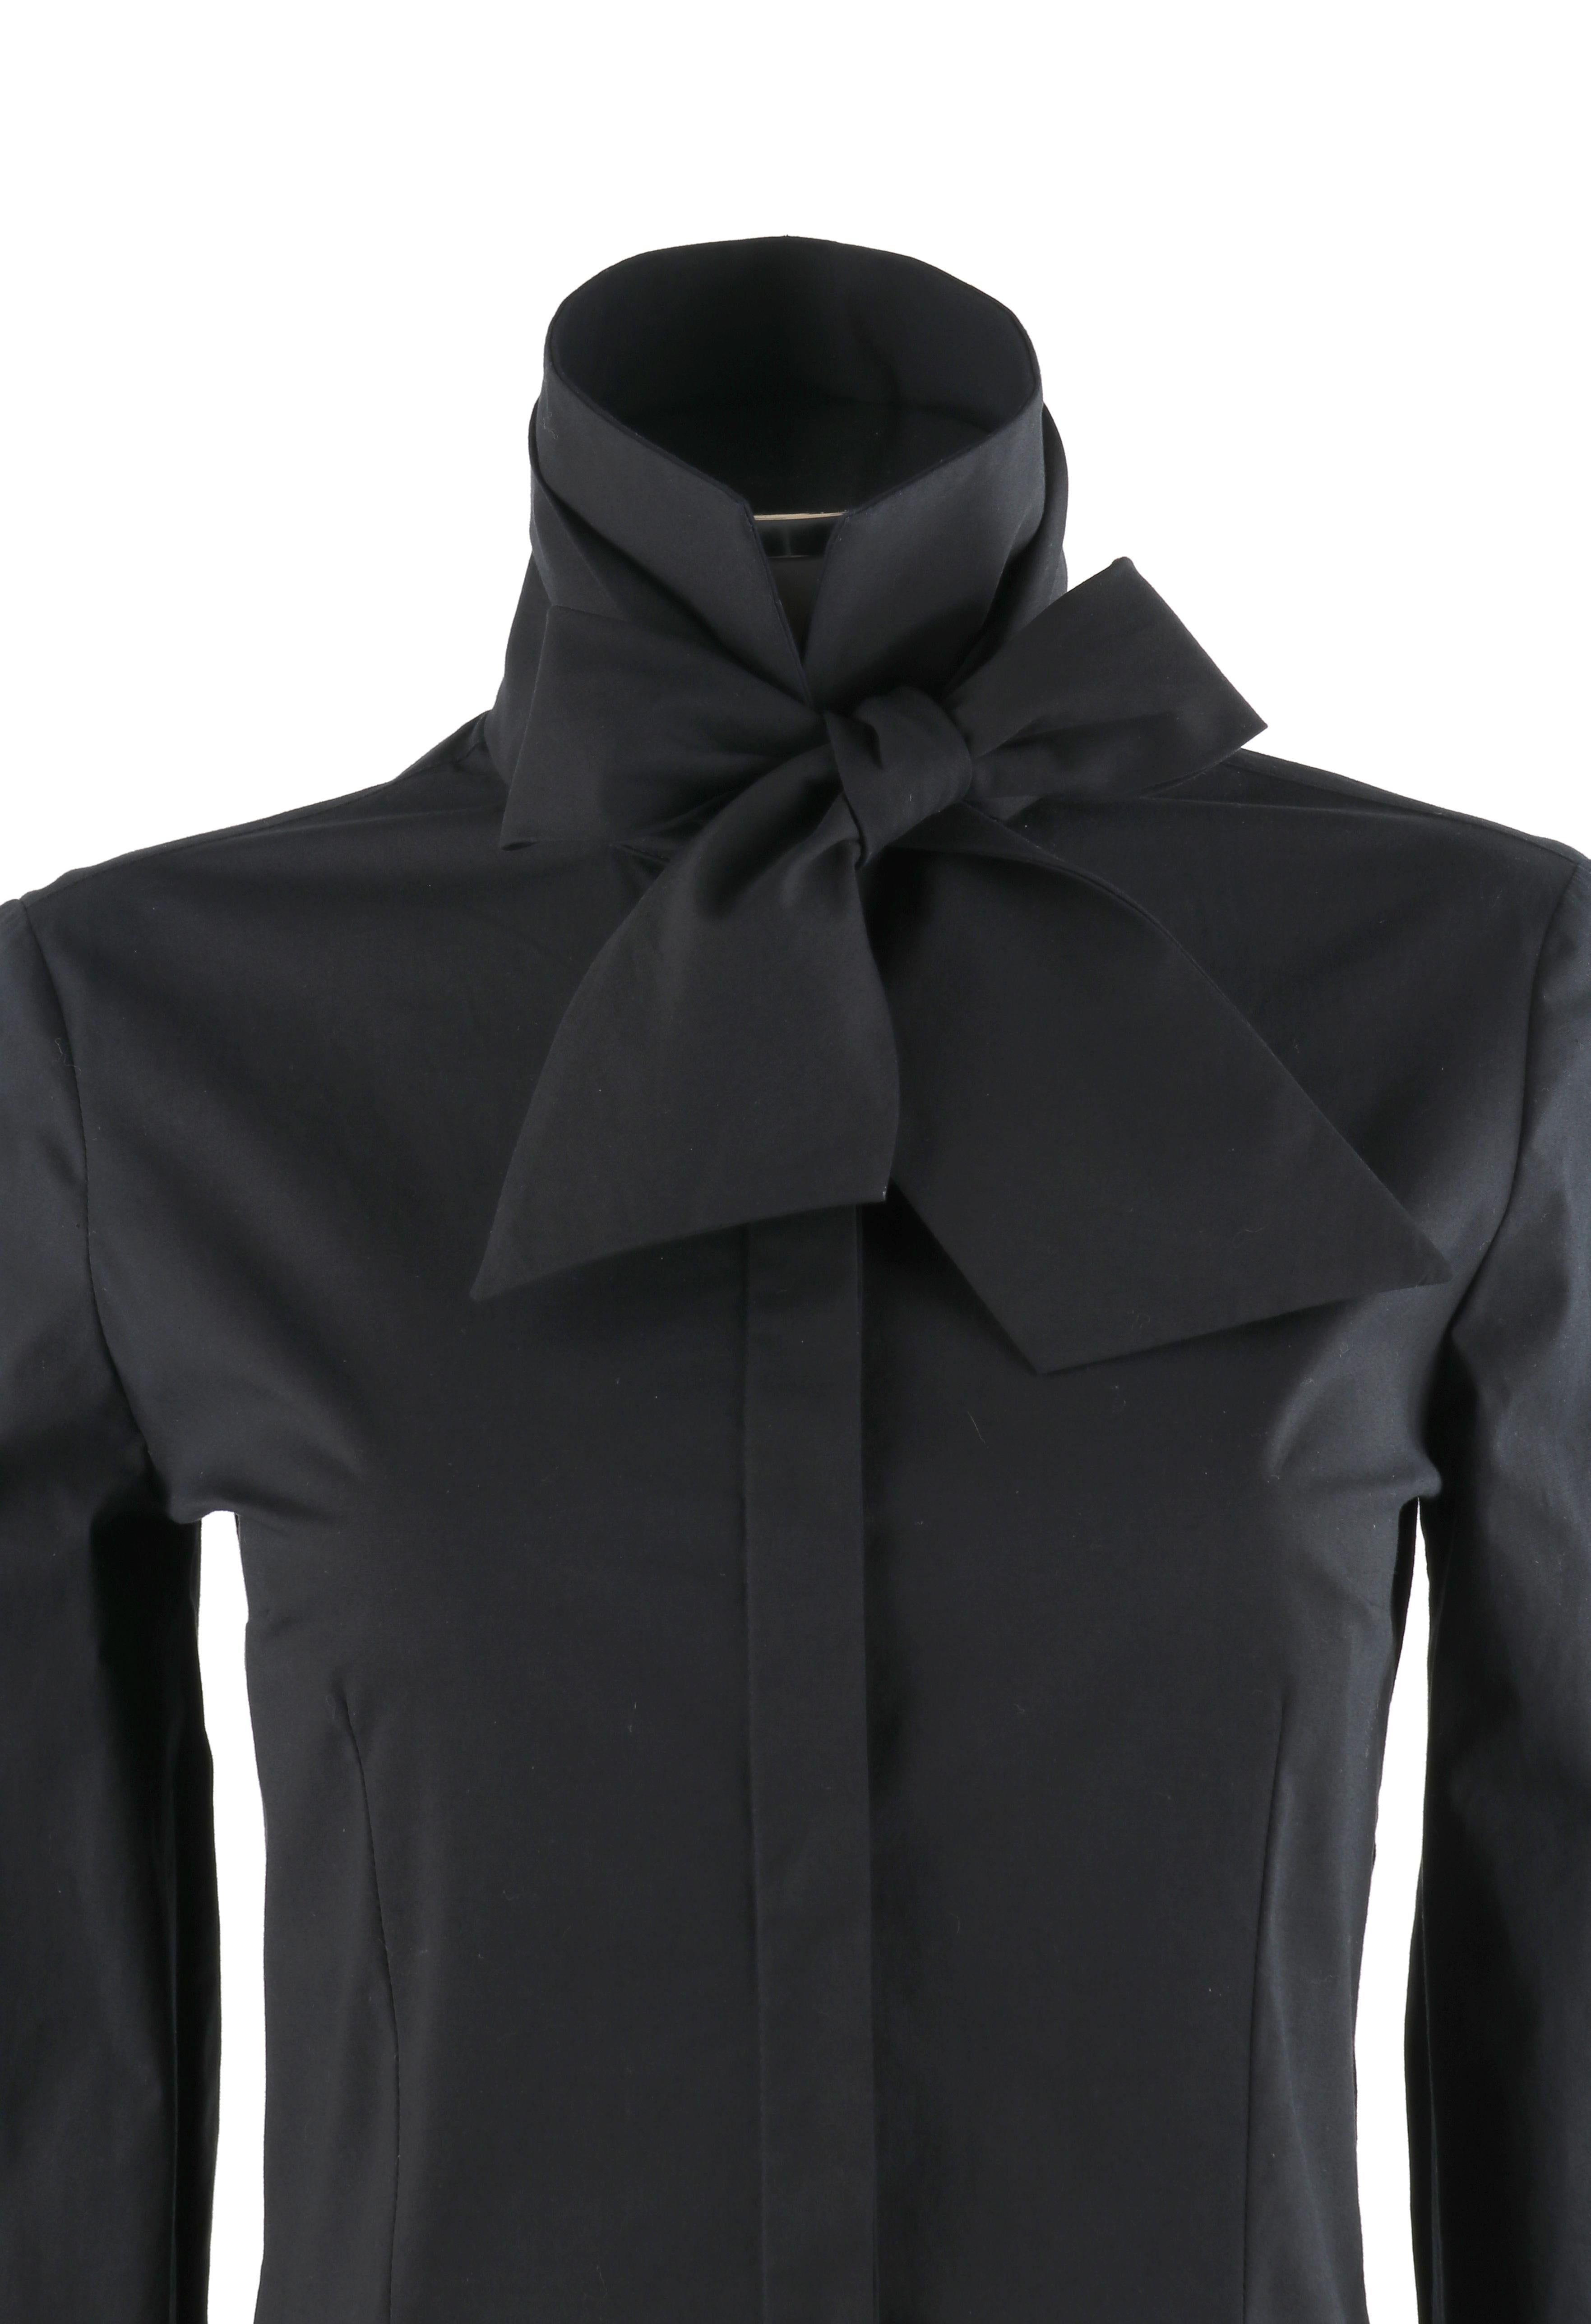 Women's ALEXANDER McQUEEN A/W 2008 “The Girl Who Lived In The Tree” Black Tie Blouse